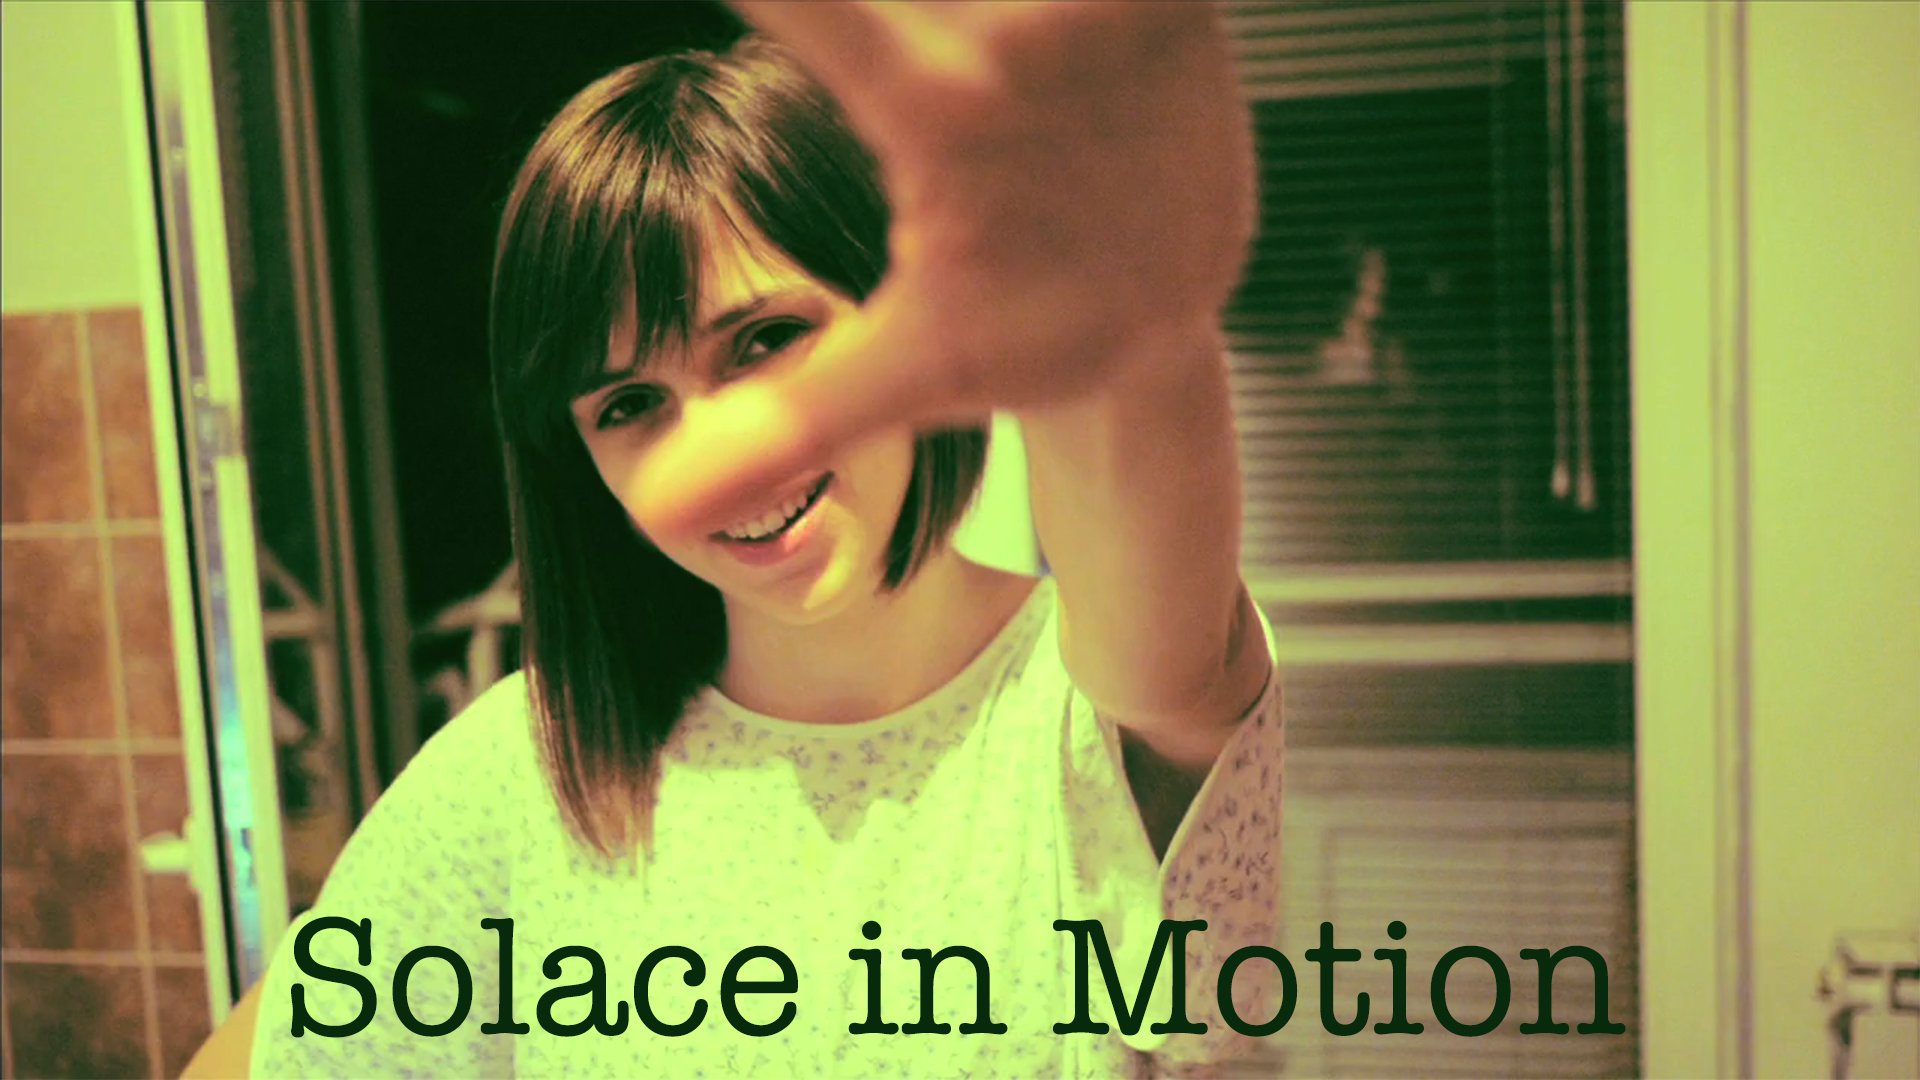 Solace in Motion